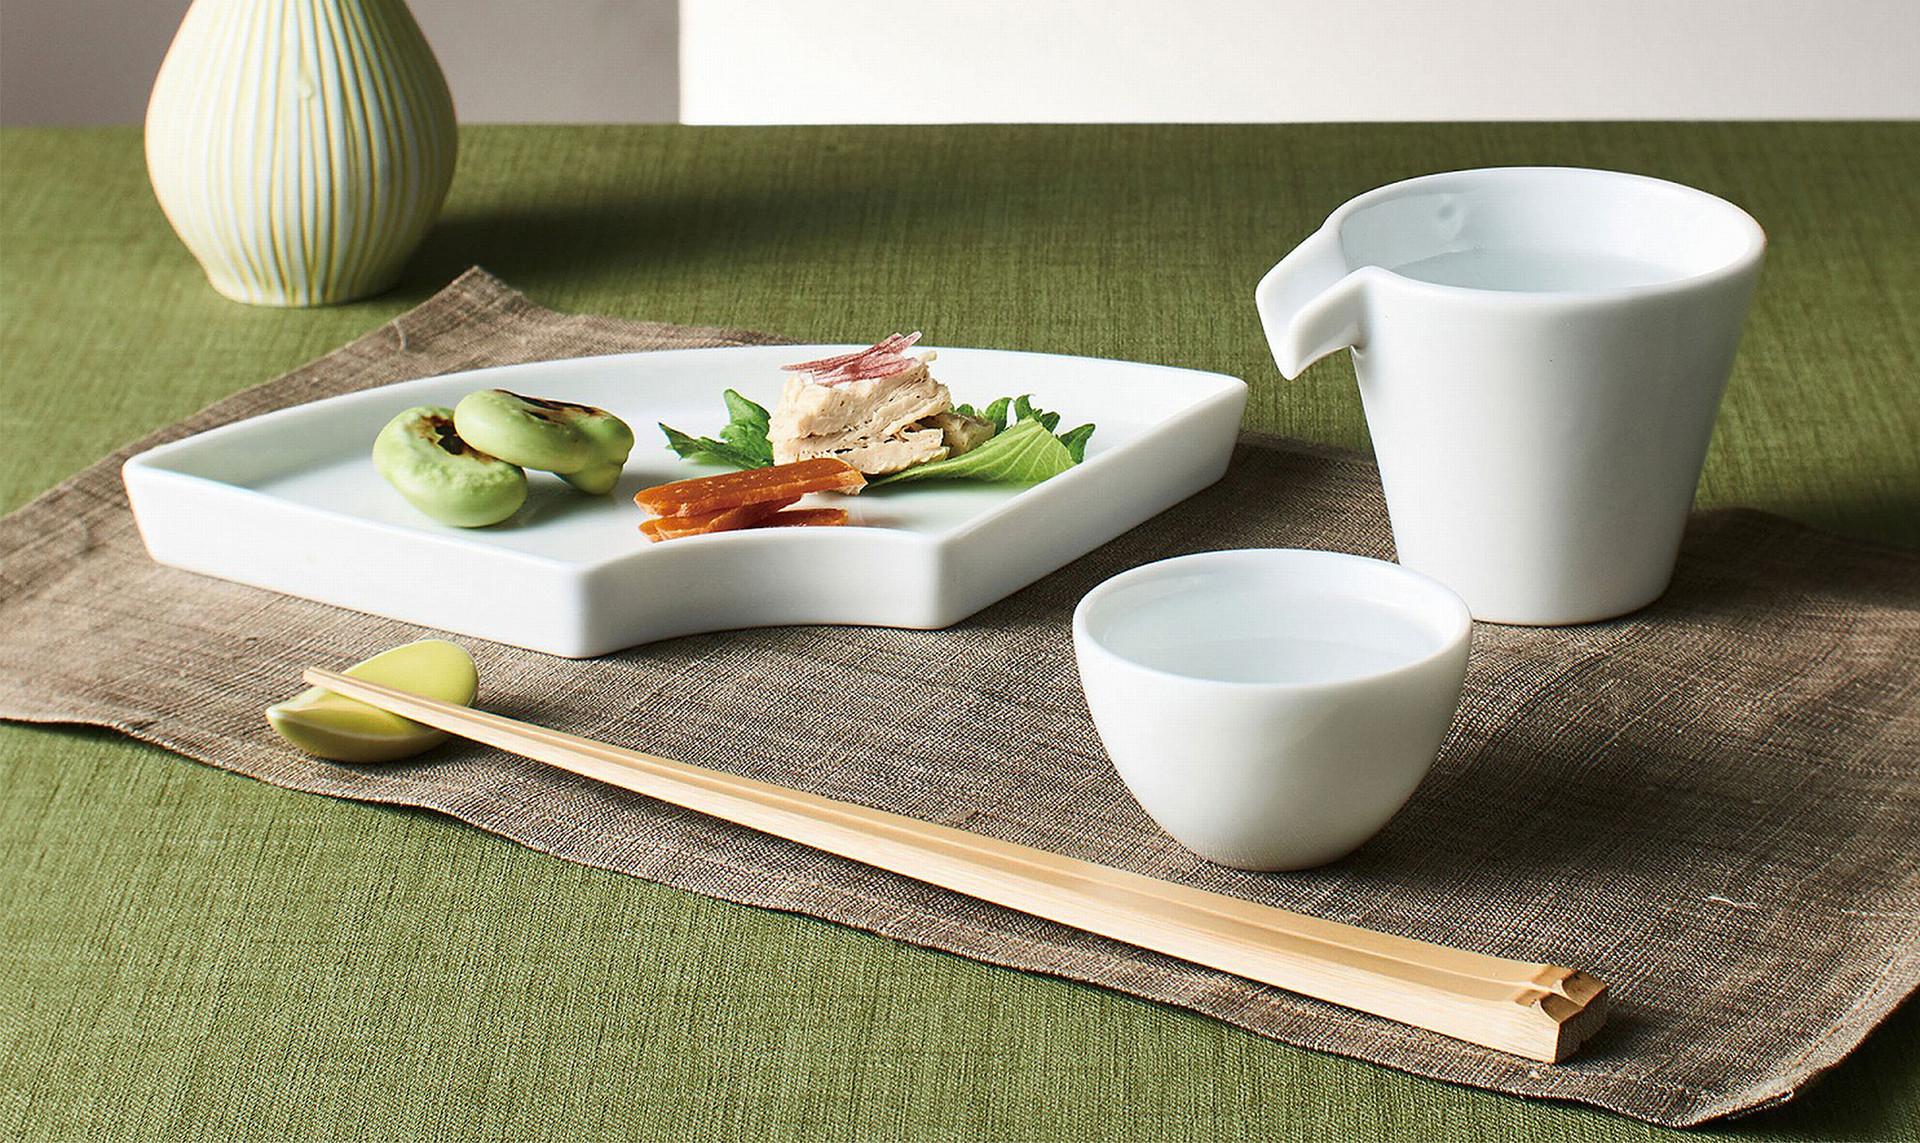 Japanese Tableware by Aito